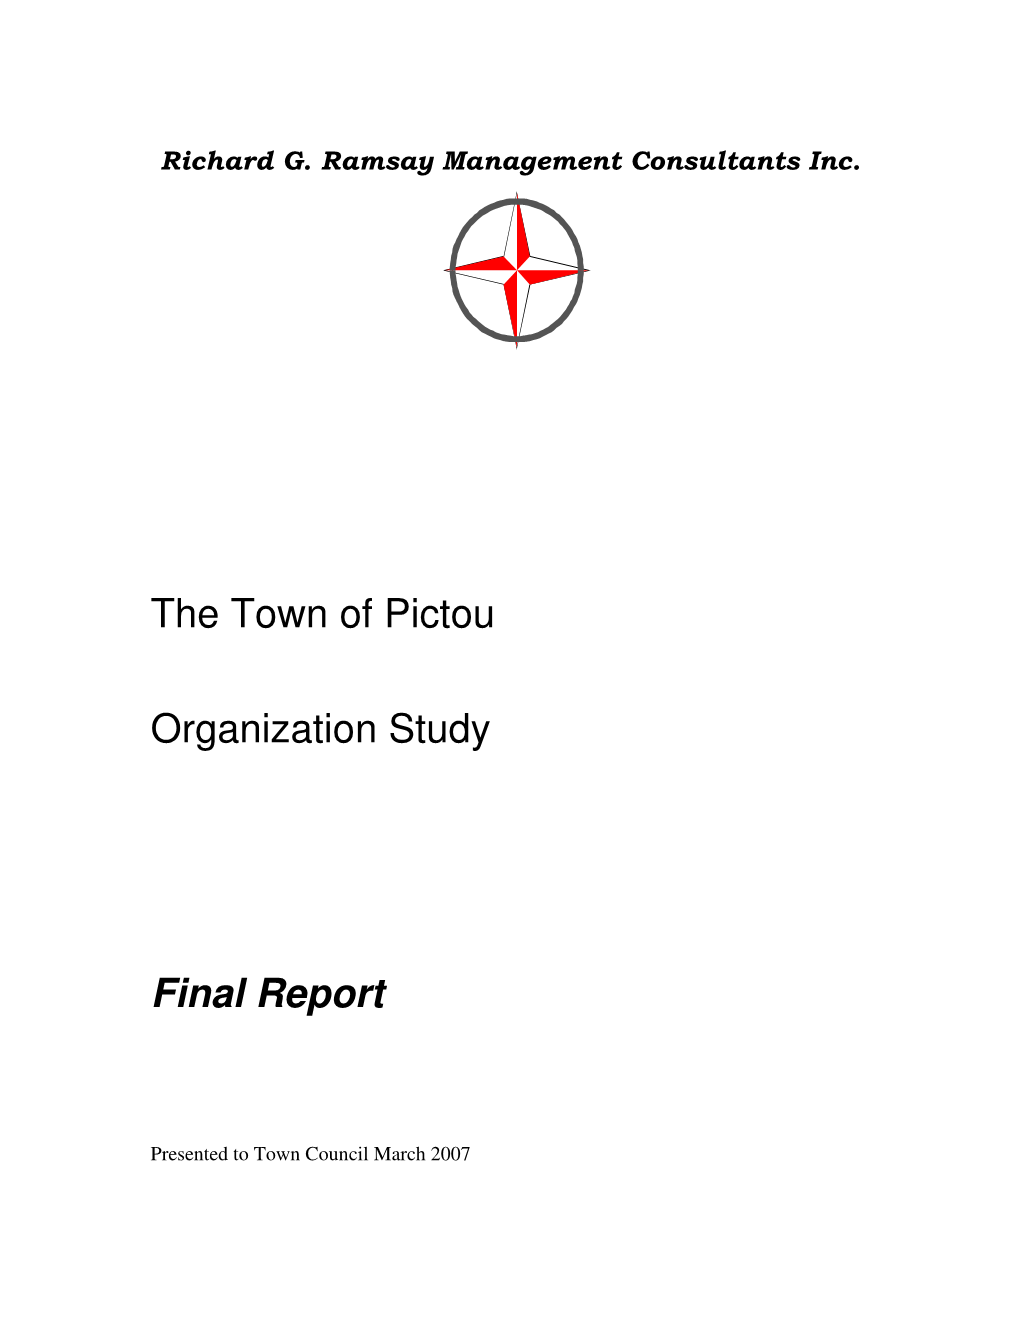 The Town of Pictou Organization Study Final Report